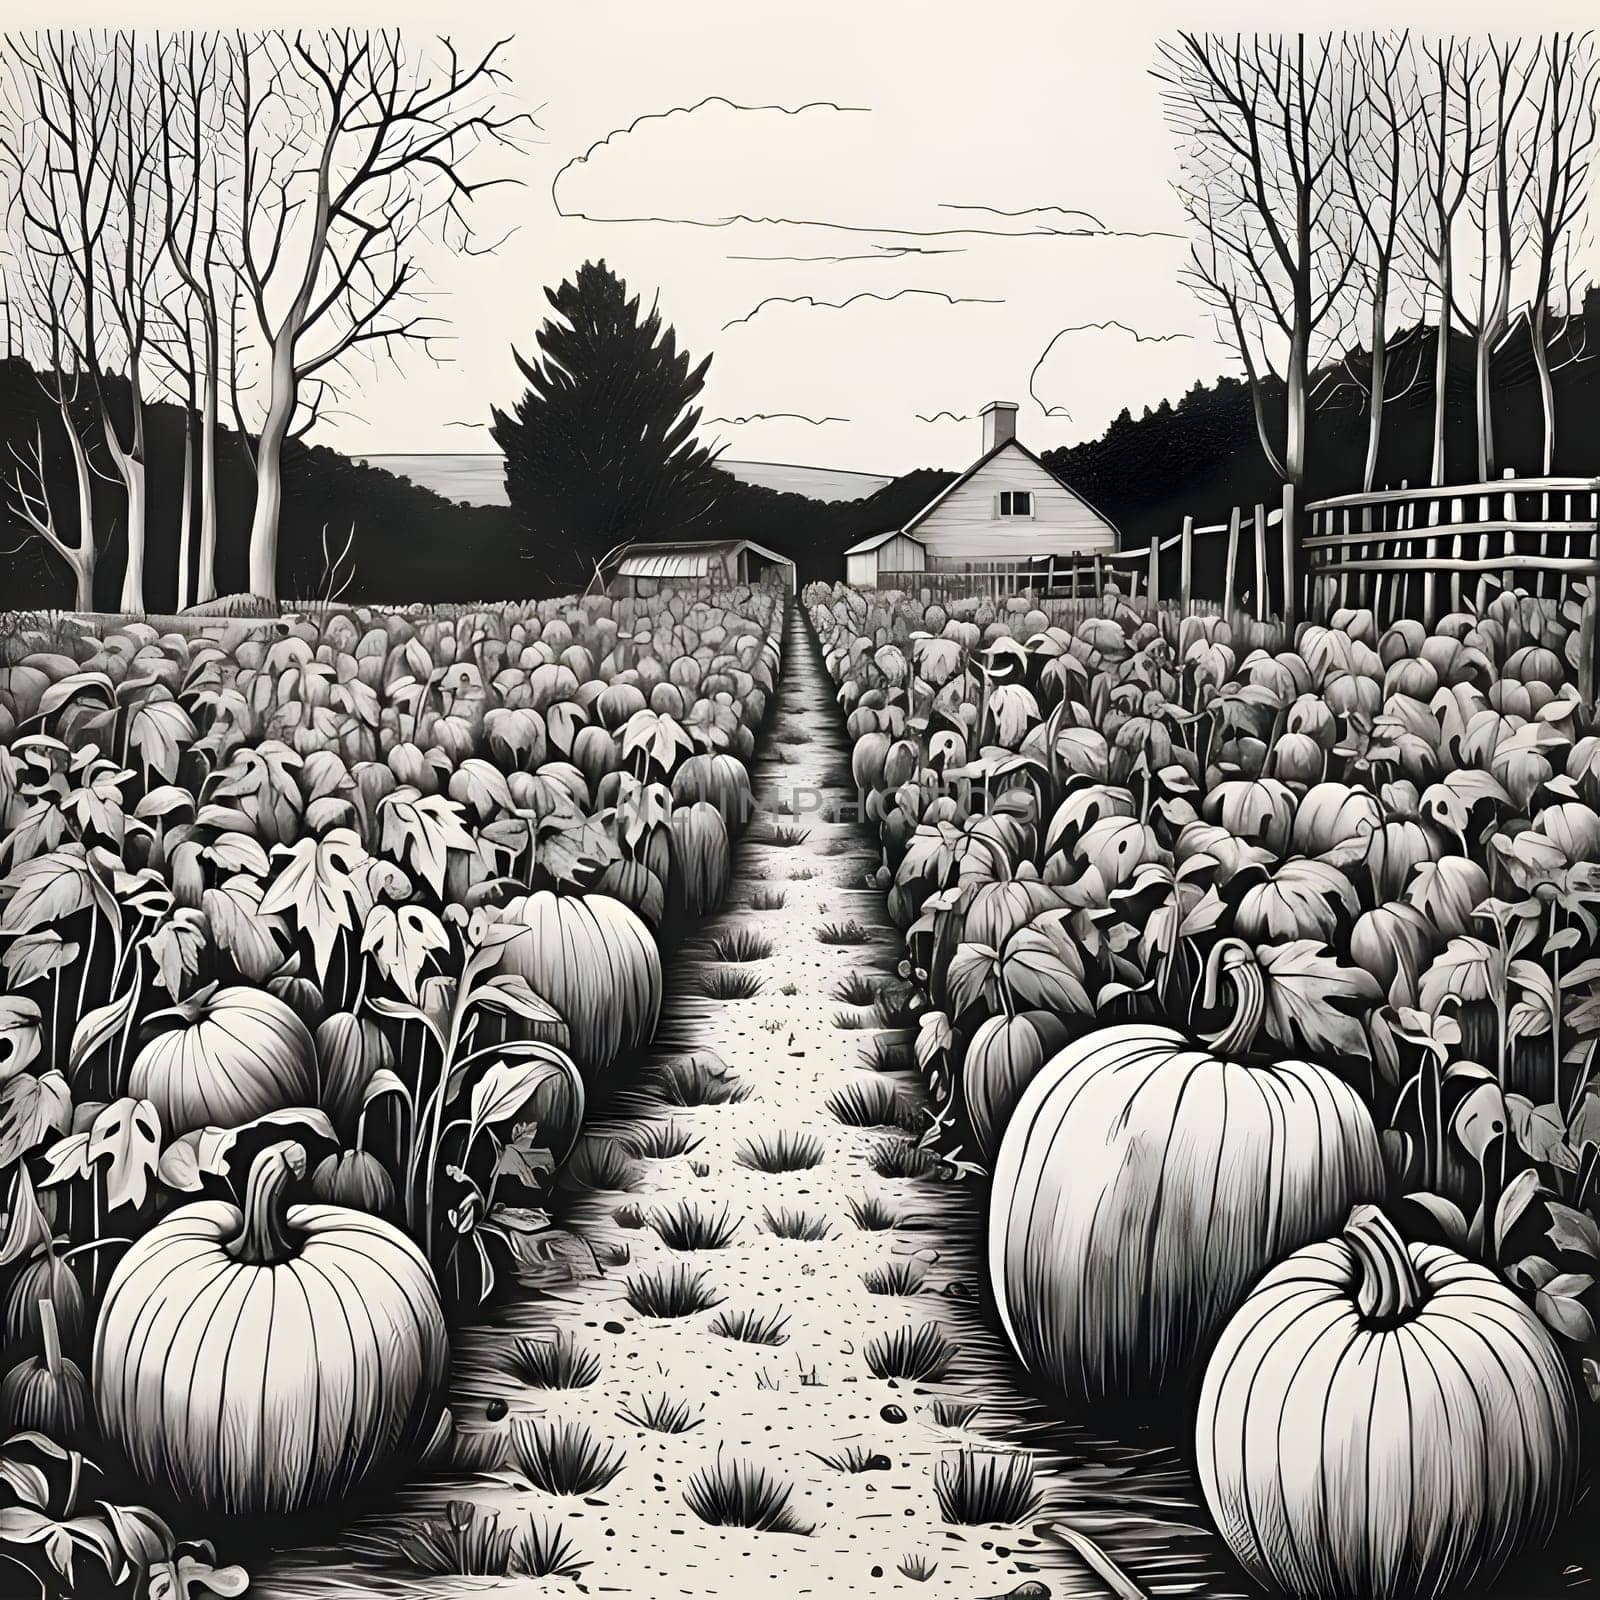 Black and white pumpkin field, shriveled trees and farm. Pumpkin as a dish of thanksgiving for the harvest. An atmosphere of joy and celebration.